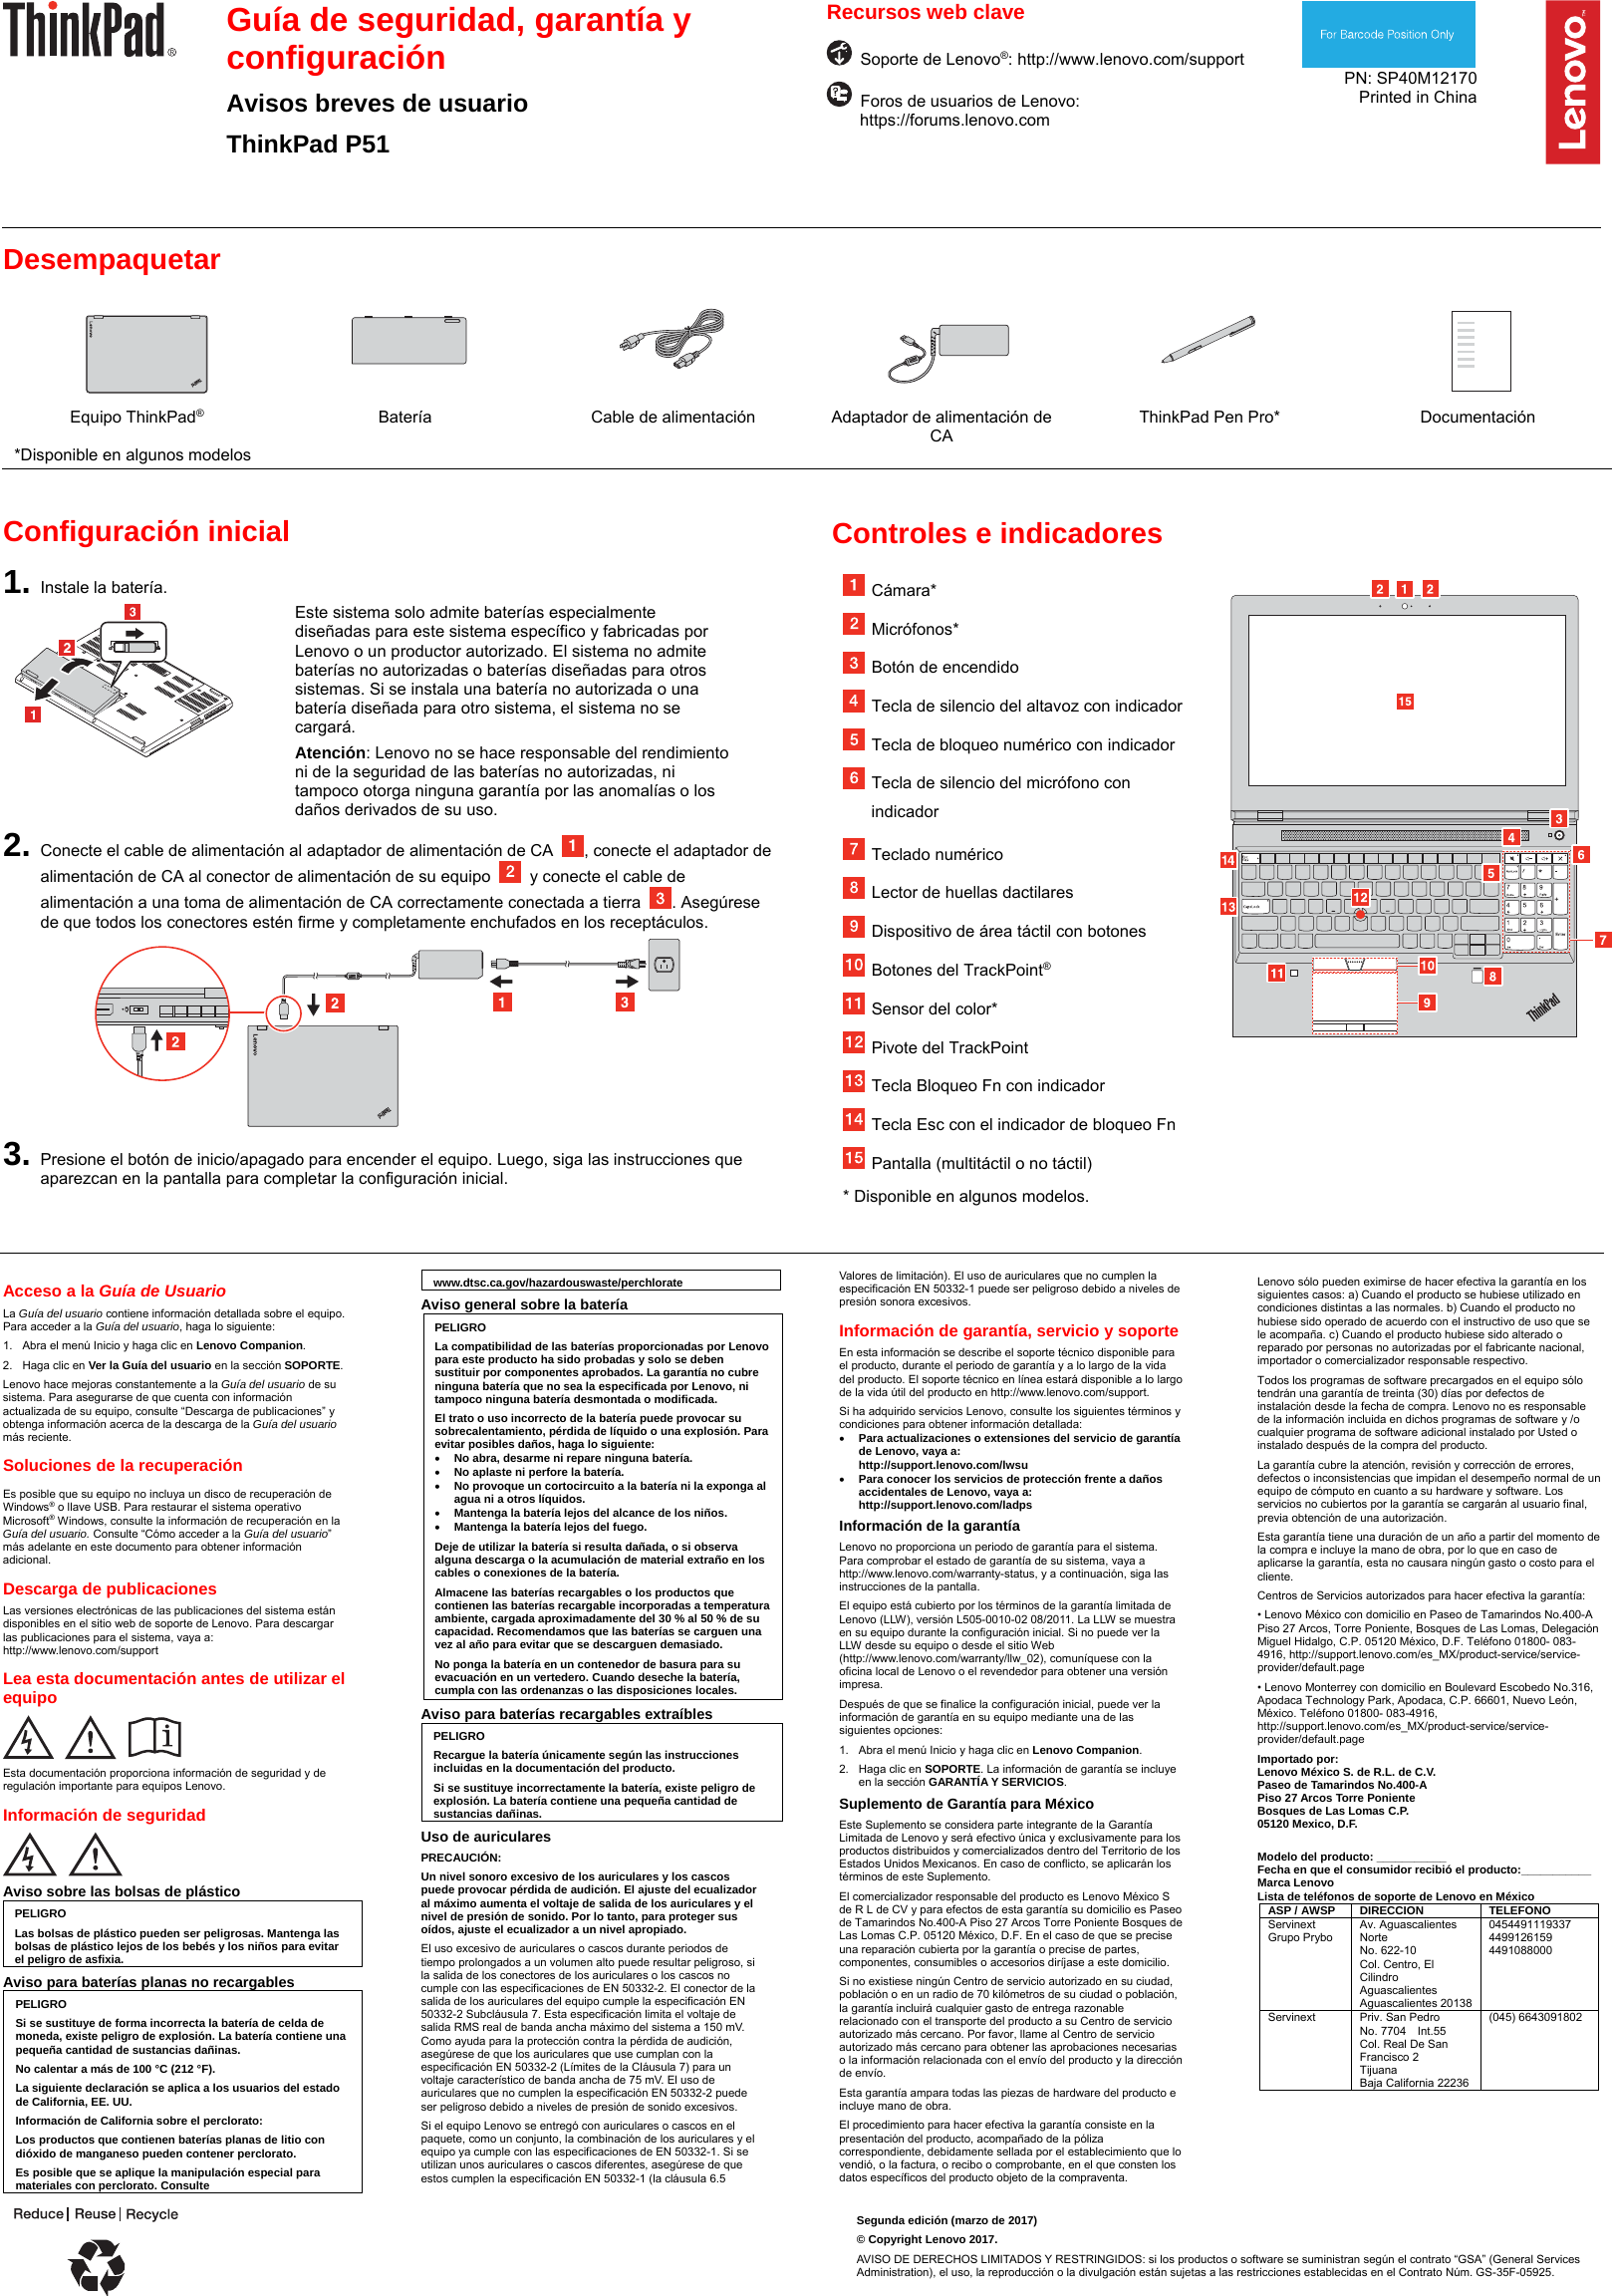 Page 1 of 2 - Lenovo P51 Swsg Es Sp40M12170 - Dfile_207222_p51_swsg_en_sp40m121_es-xnx User Manual (Spanish) Safety, Warranty And Setup Guide Think Pad (20HH, 20HJ) (Type 20HH, Laptop (Thinkpad) Type 20HJ